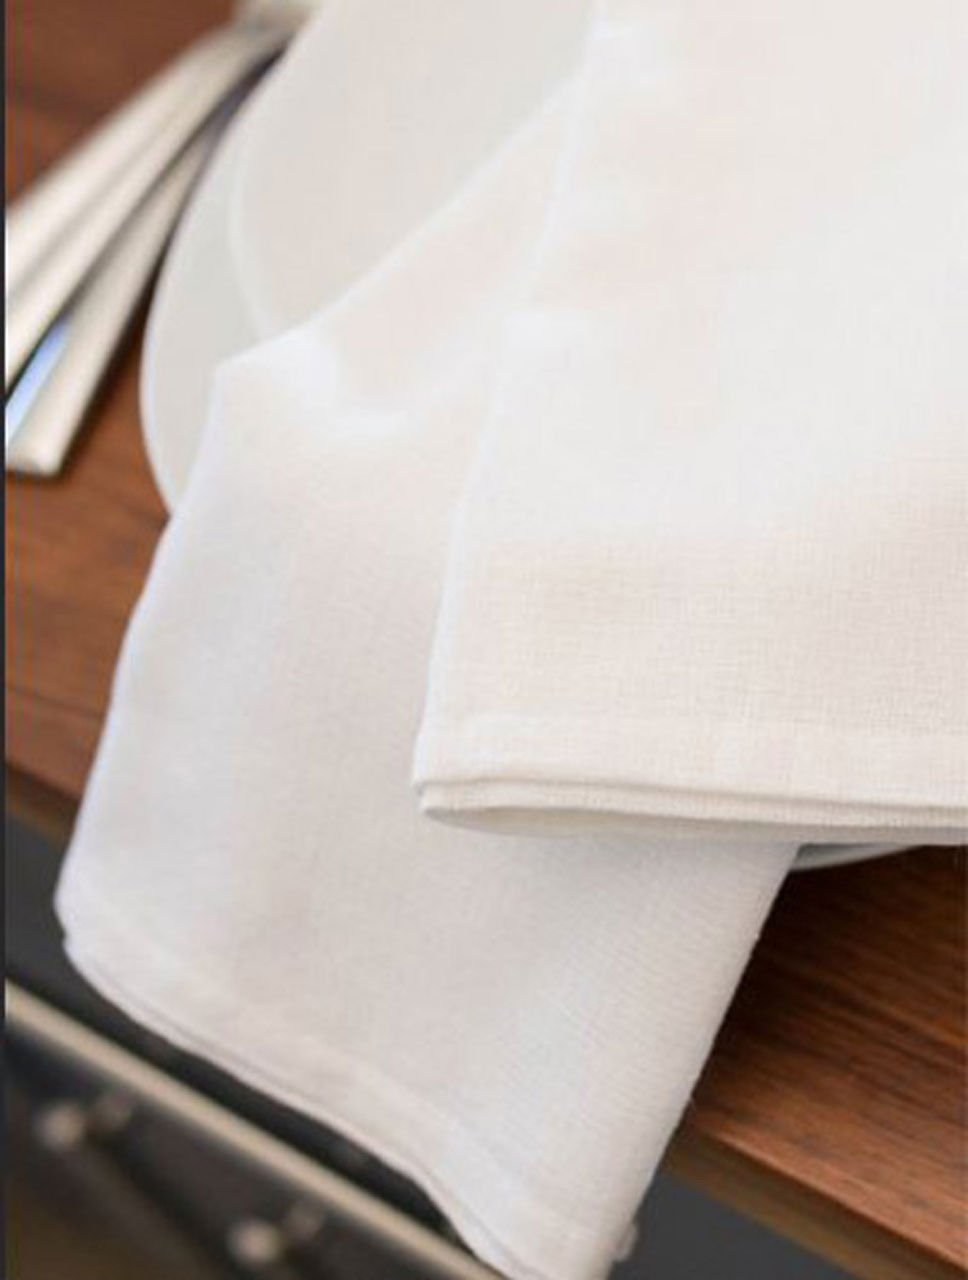 What can the 100% Cotton Huck Towel effectively clean?